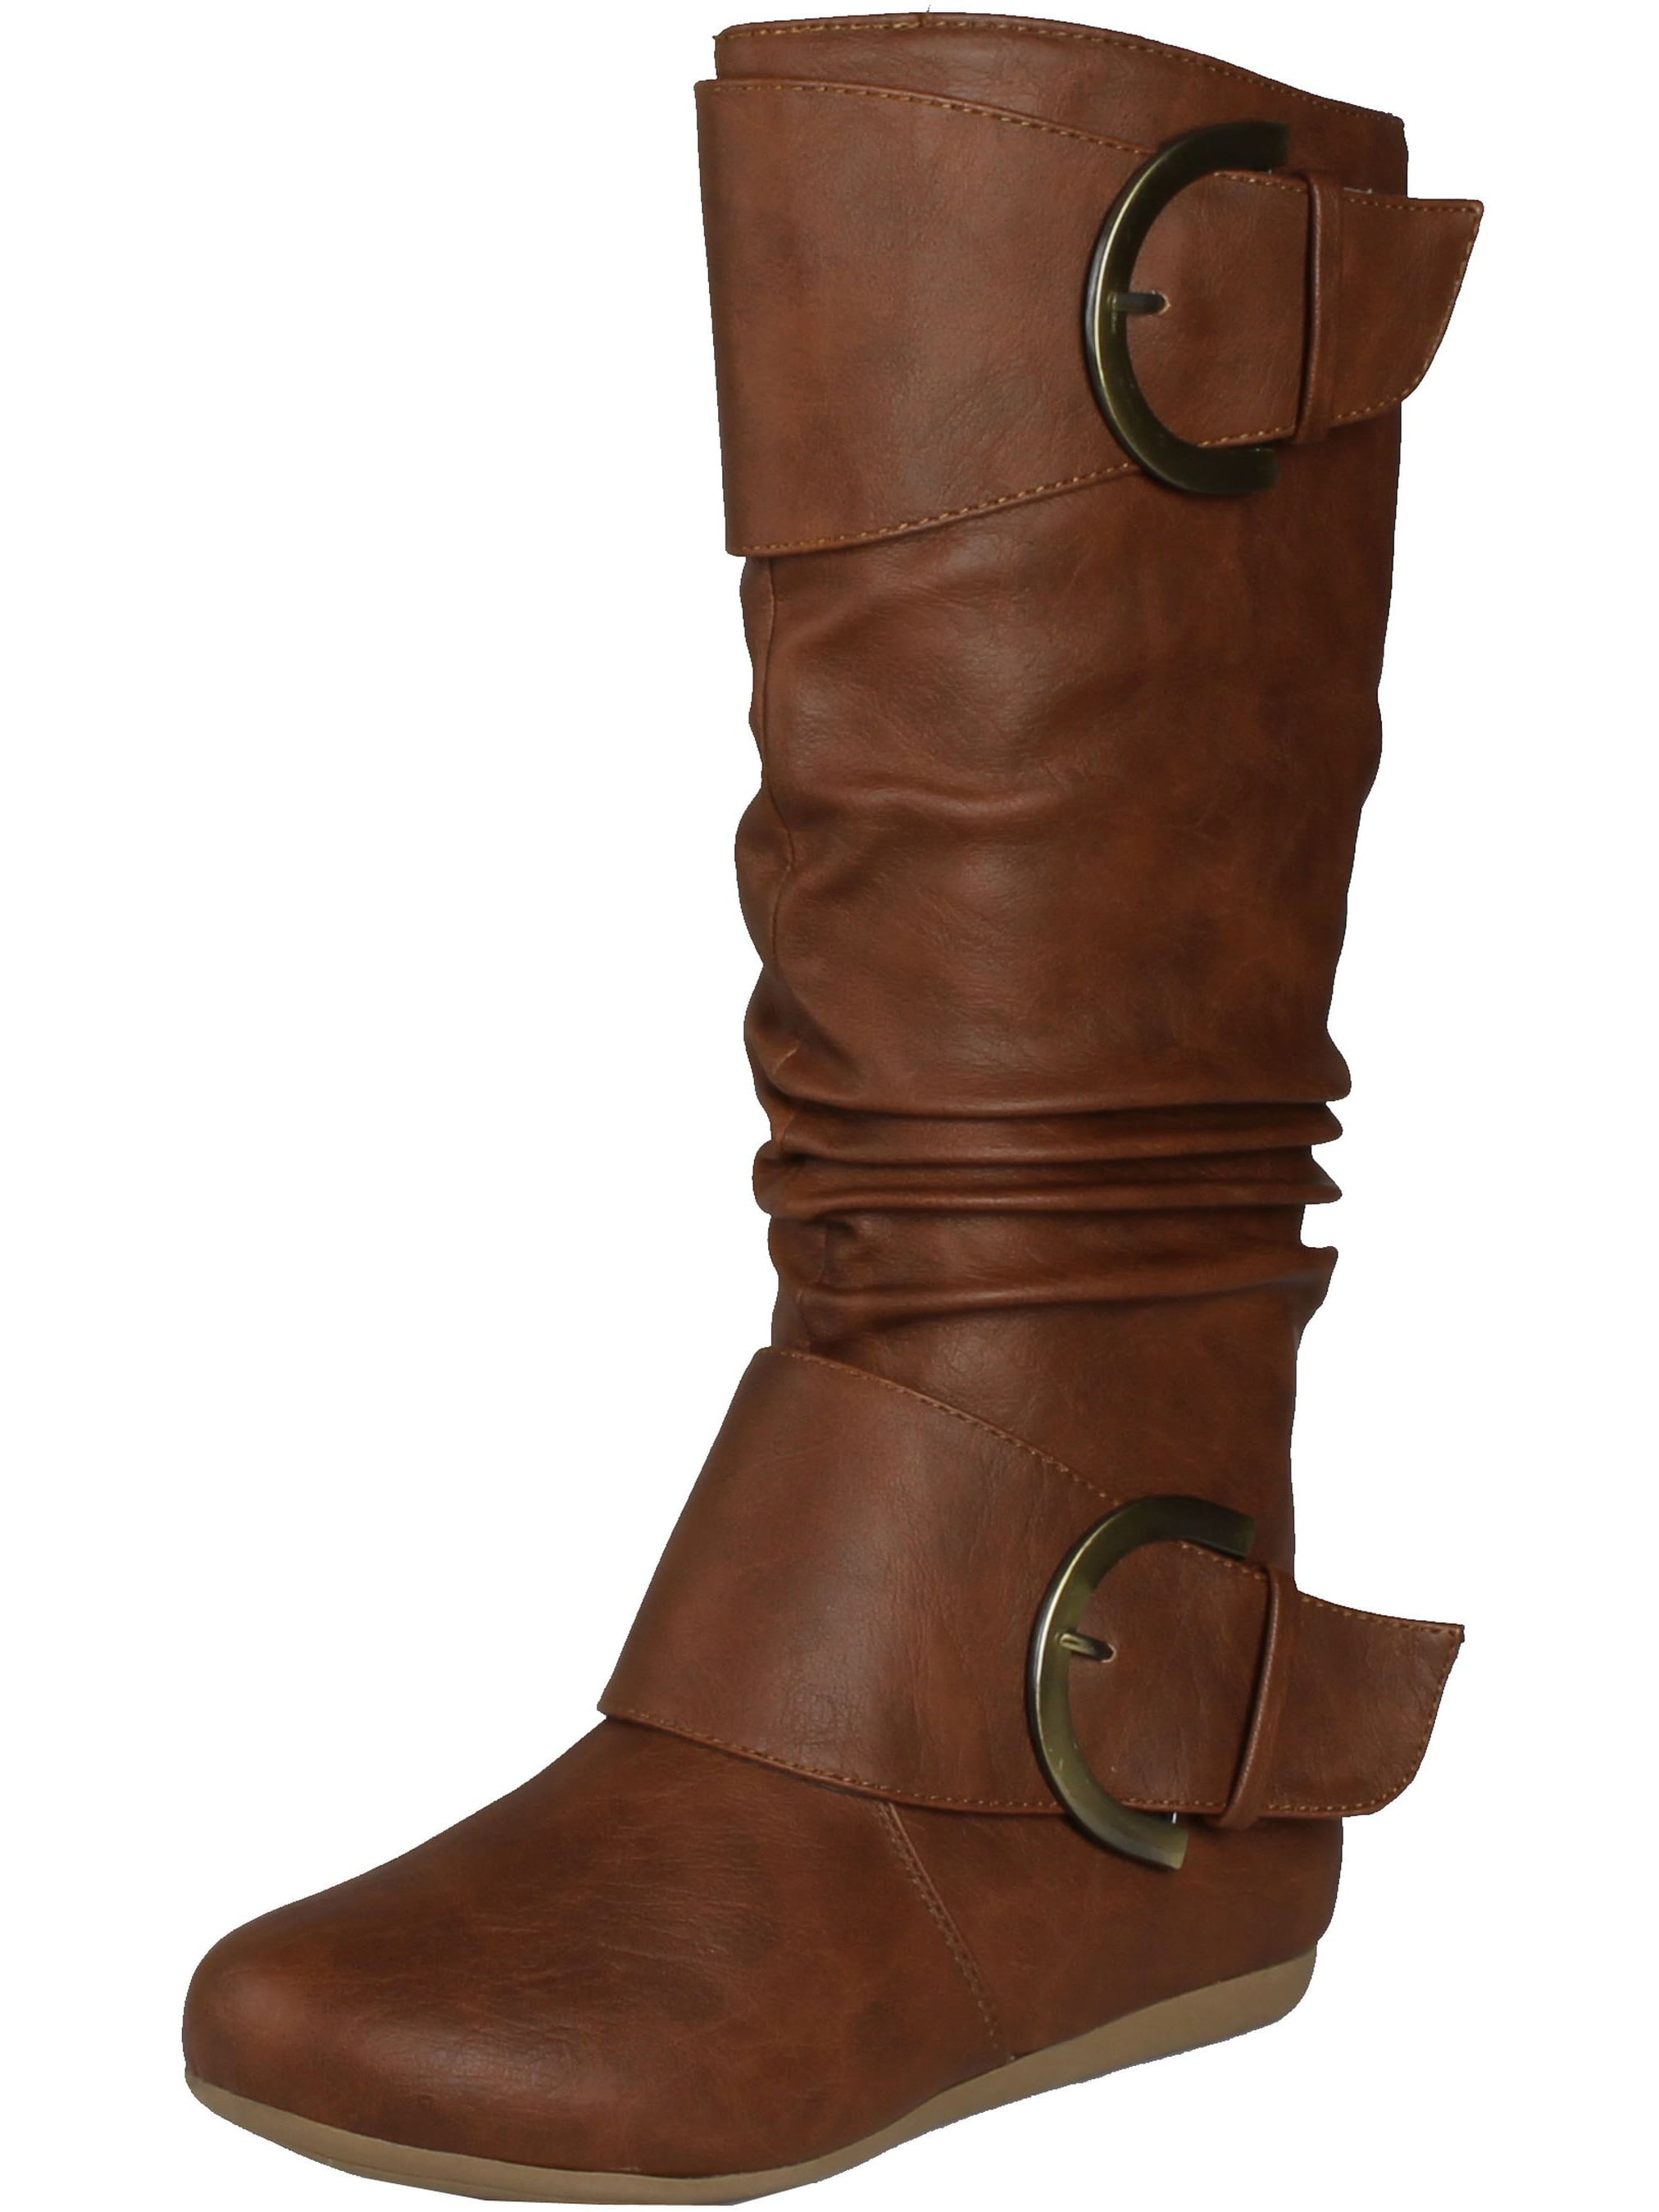 Top Moda - Top Moda Women's Bank 85 Slouch Boots with Buckle, Tan, 7 ...